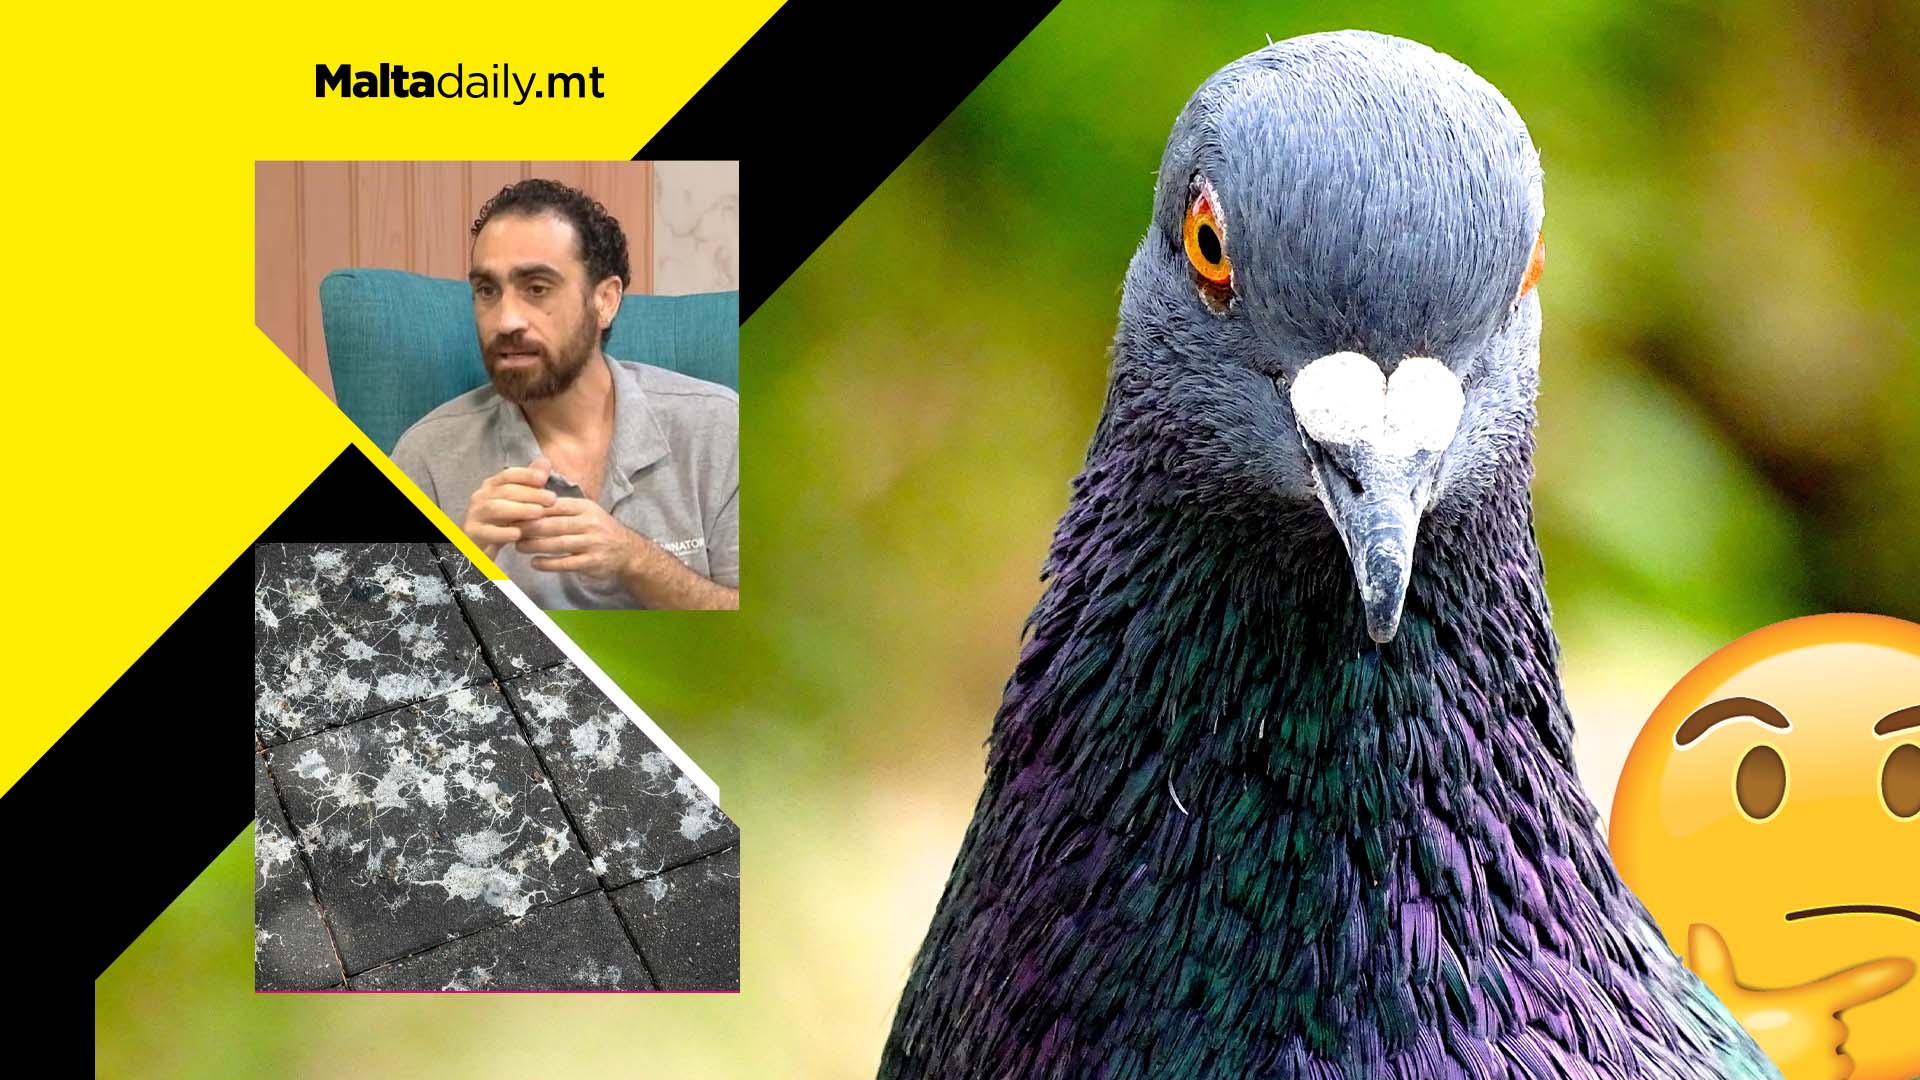 What is 'Pigeon Birth Control' and how is it helping Malta's pest problem?